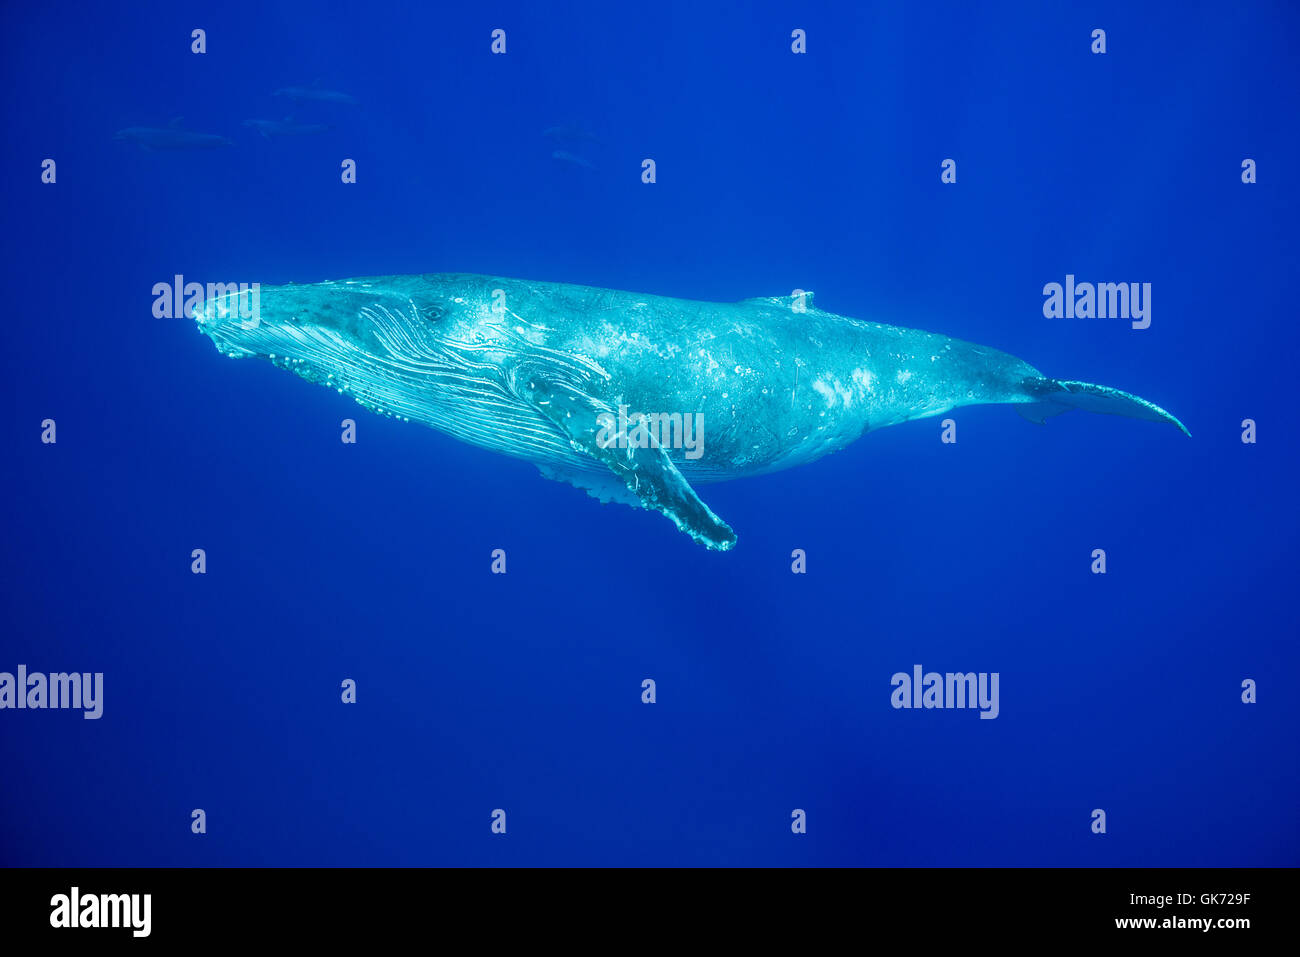 yearling humpback whale, Megaptera novaeangliae, with bottlenose dolphins, Tursiops truncatus, swimming in the background, Kona, Stock Photo